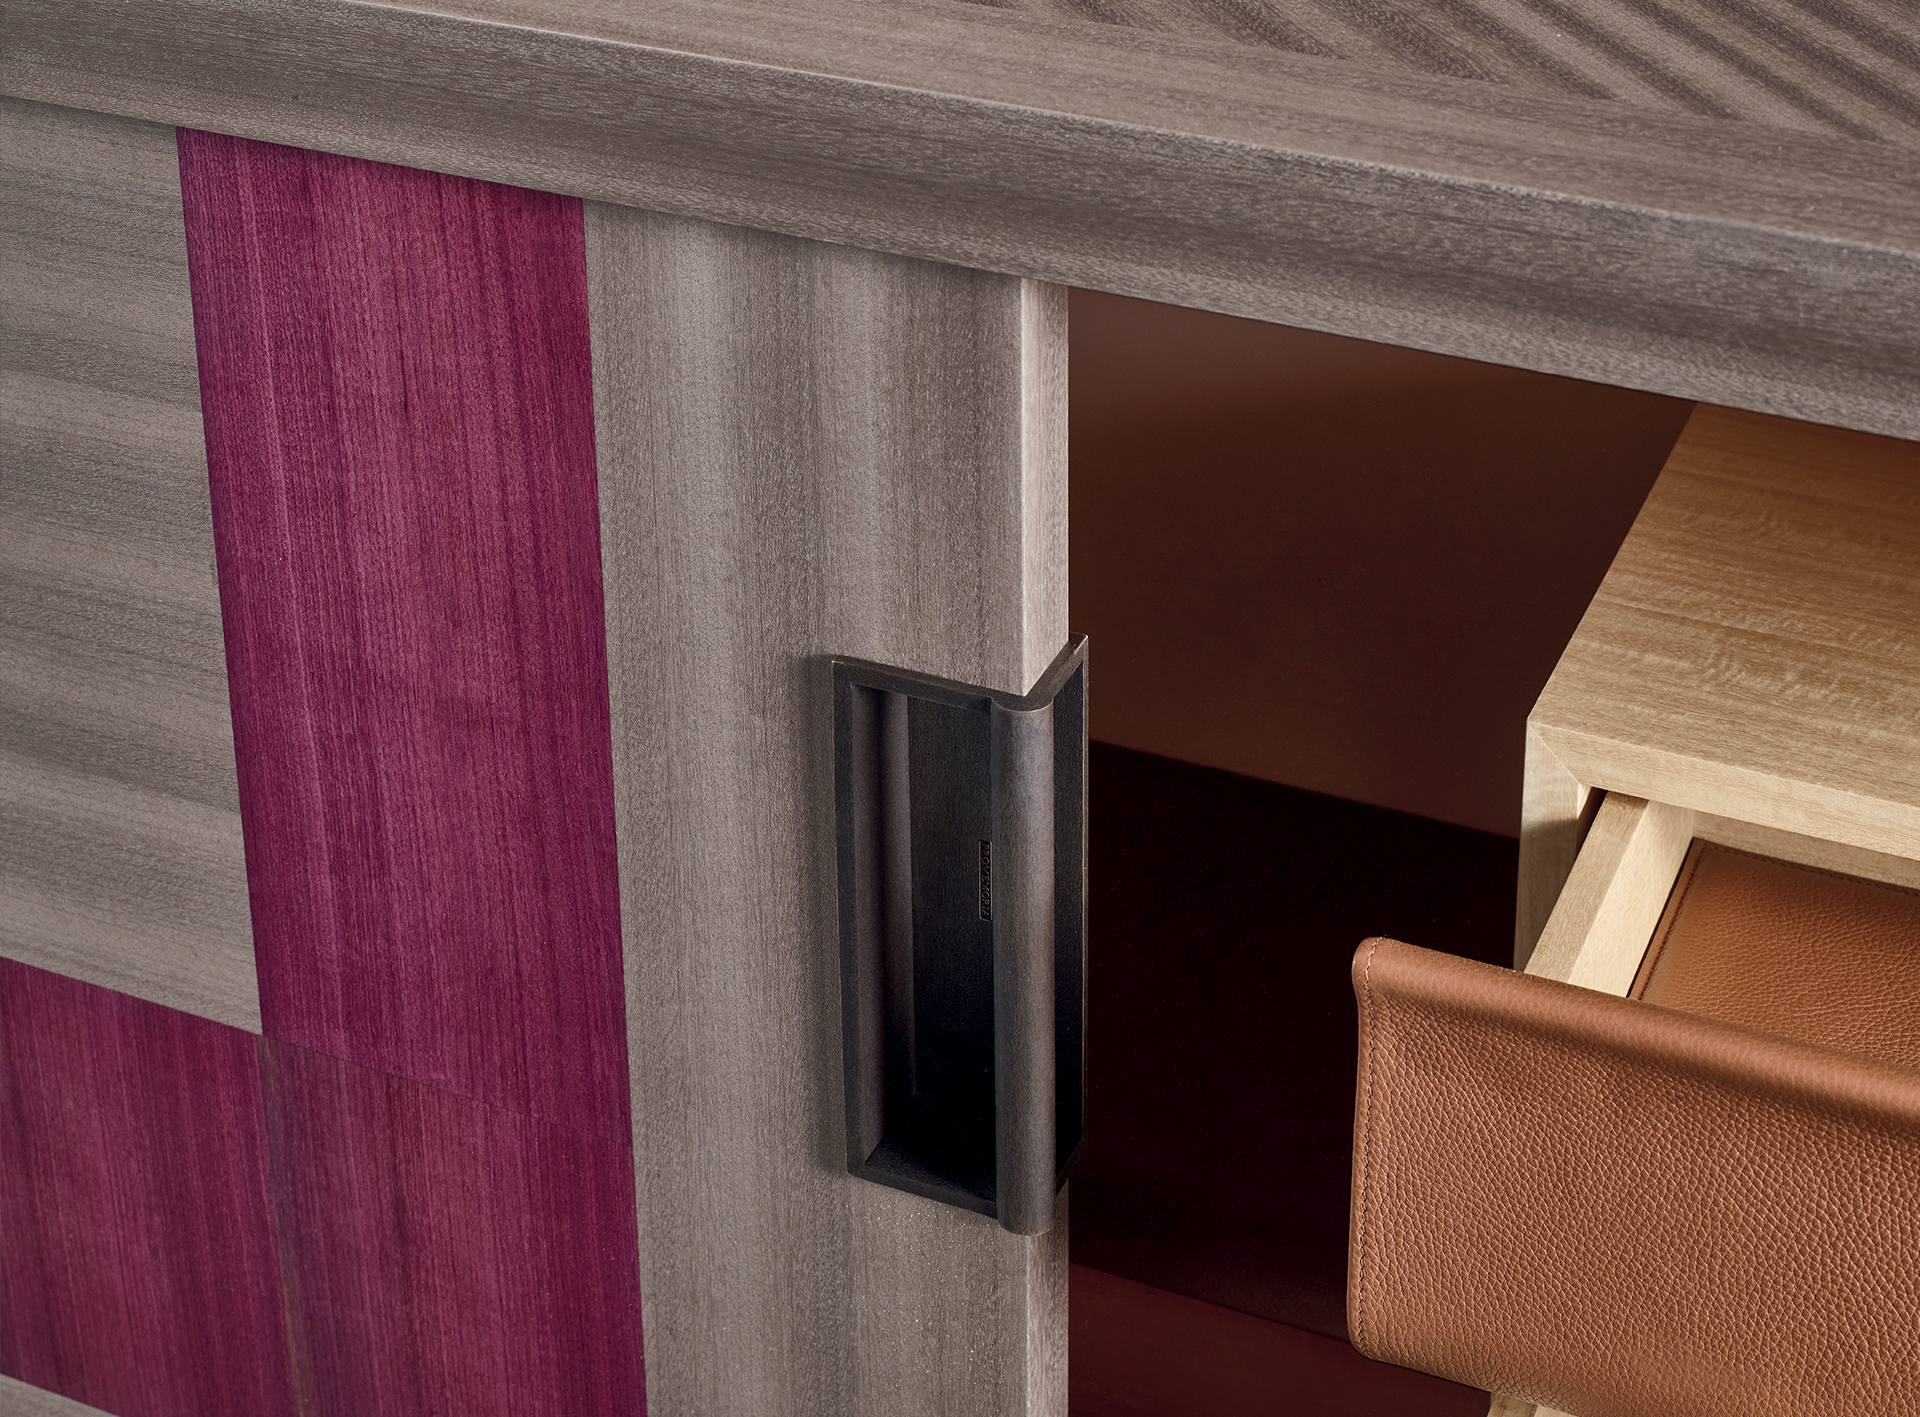 Inside of Oolong, a low wooden cabinet with sliding doors, patchwork inlay with leather drawers from Promemoria's catalogue | Promemoria